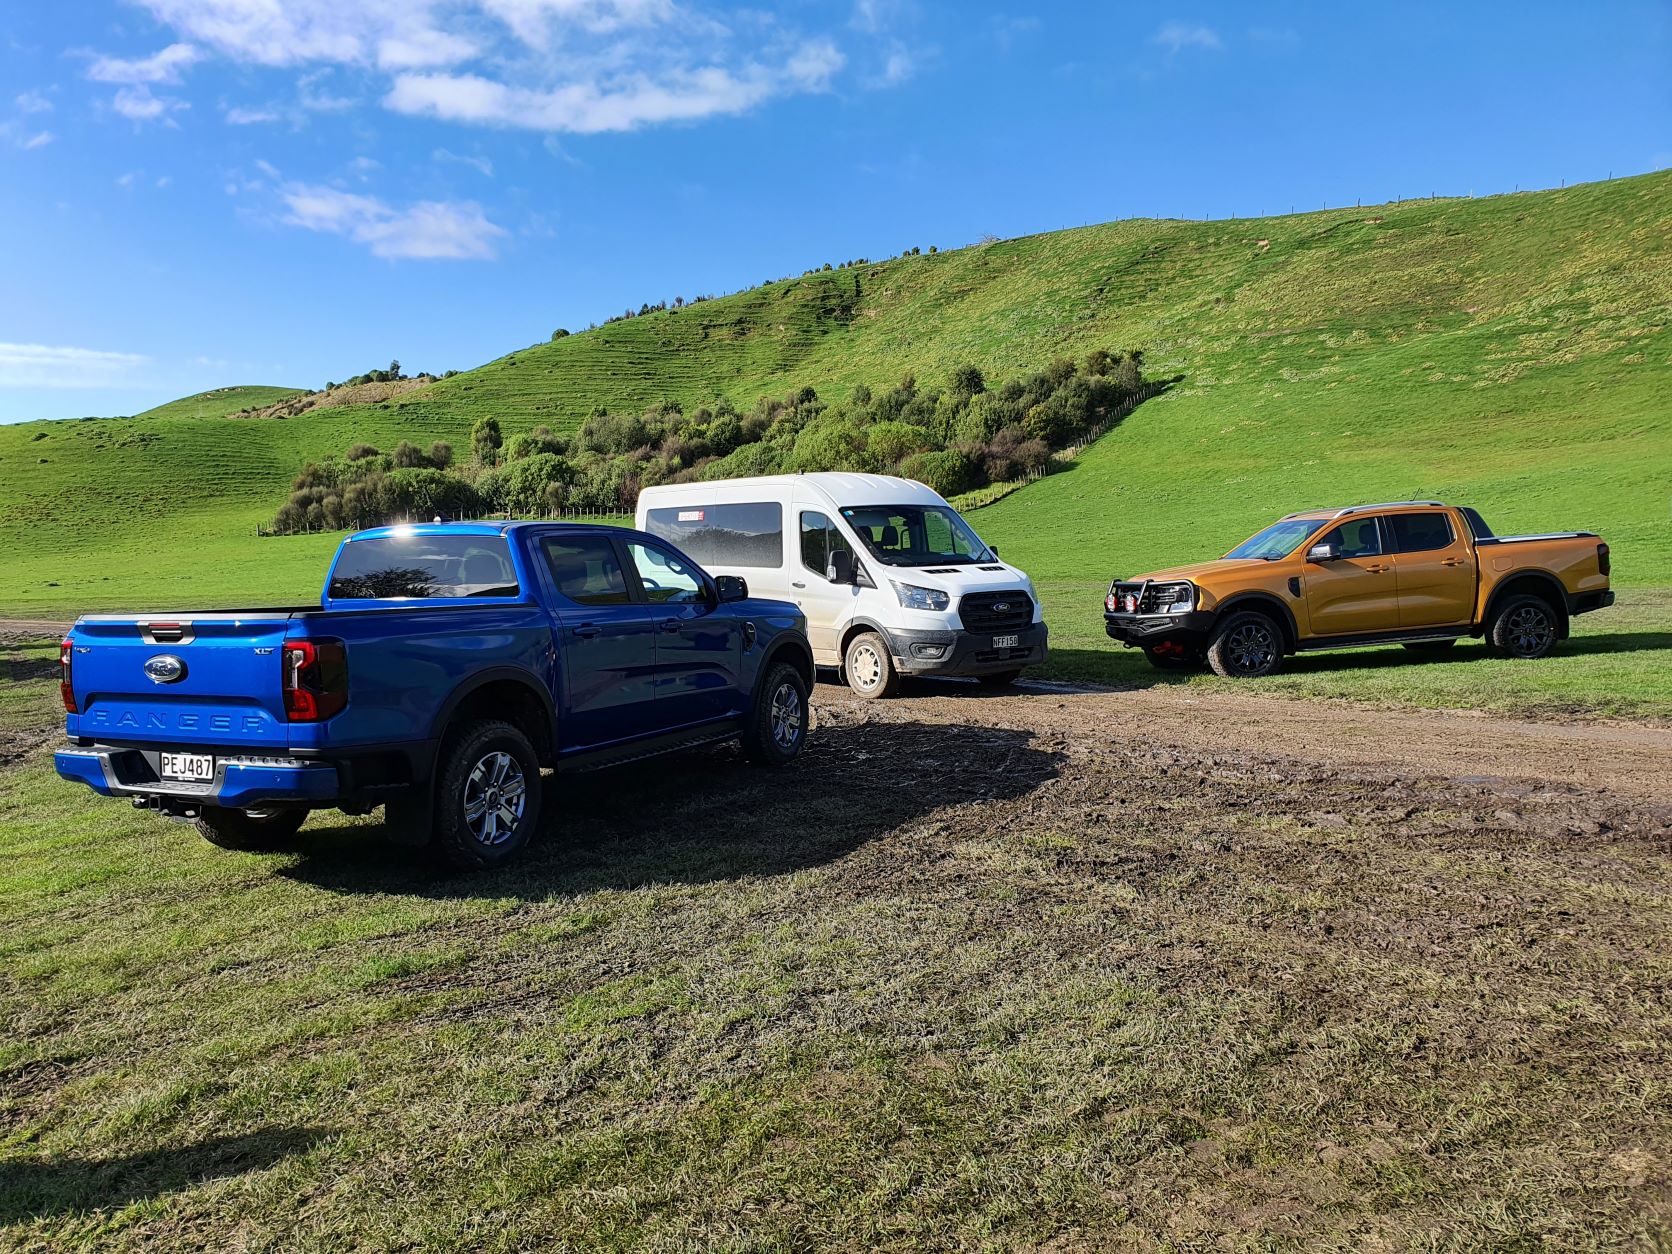 Two new Ford Rangers, a blue XLT Bi-Turbo and a gold Wildtrak flanking a white Transit van that brought us to the venue.